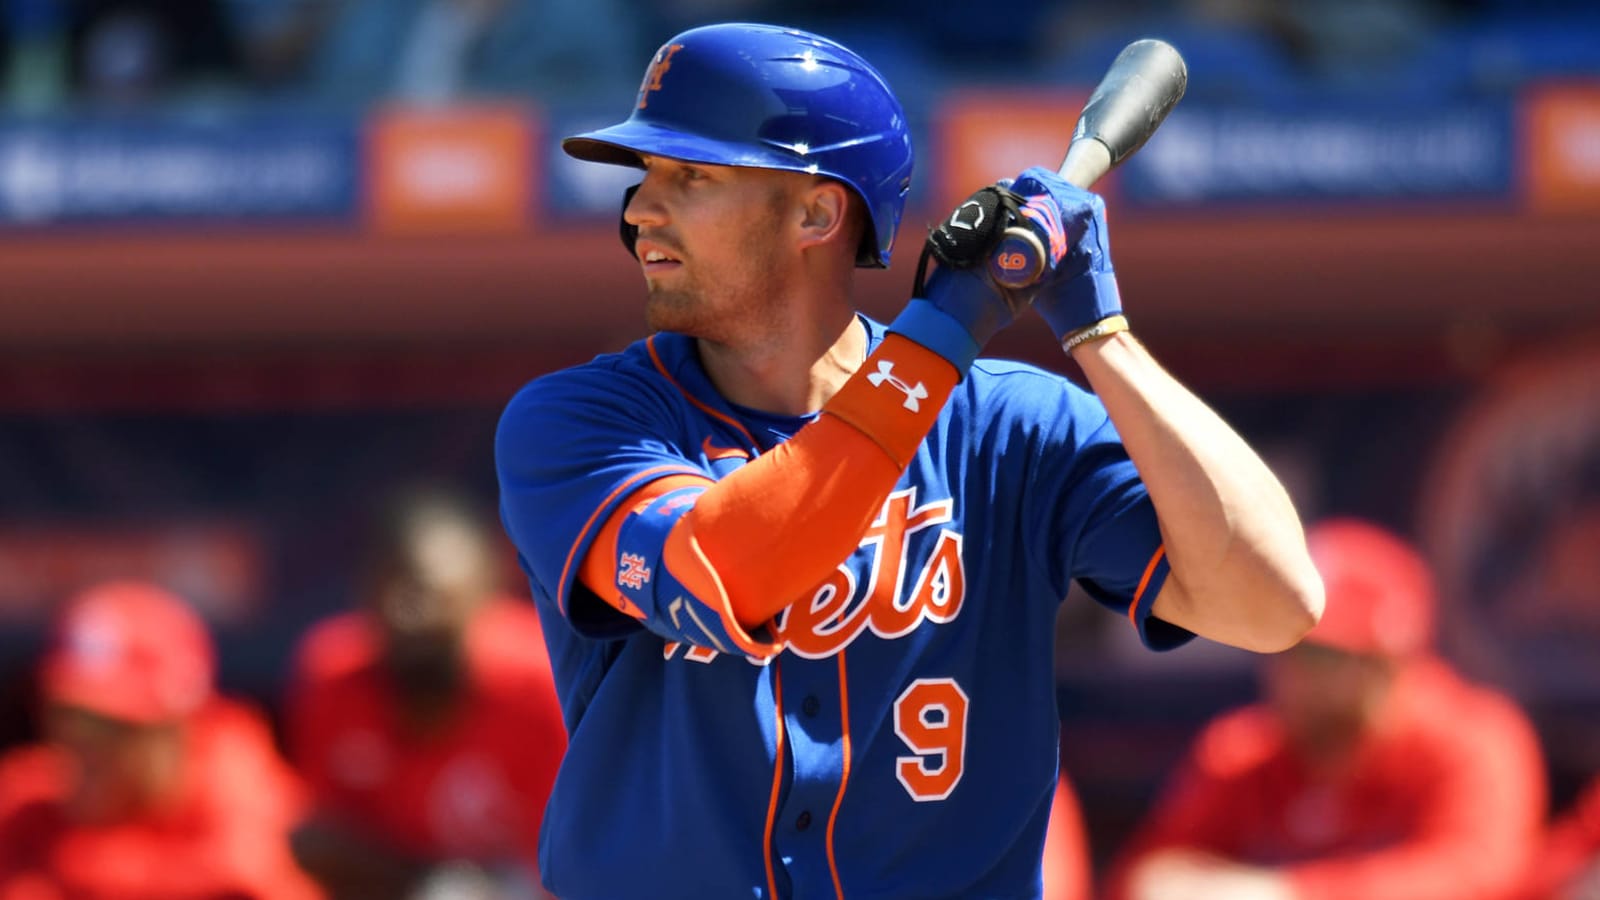 Mets' Brandon Nimmo: 'For me' wearing a mask 'does more harm than good' 